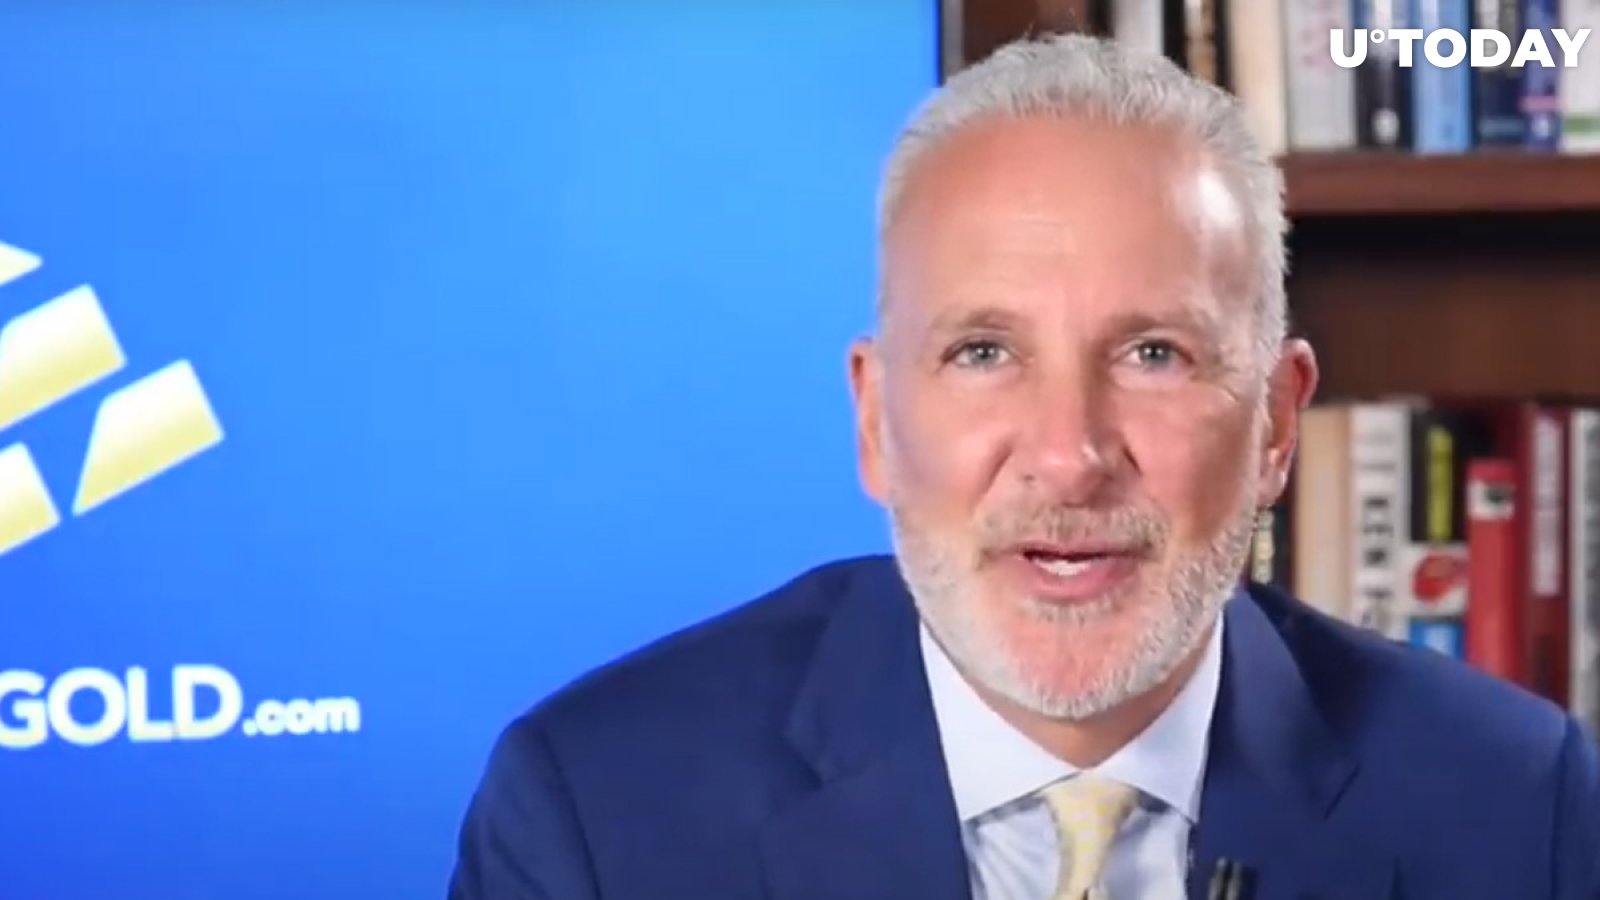 Peter Schiff Says Those Who Are Not Selling Bitcoin Now Are "Real Idiots"